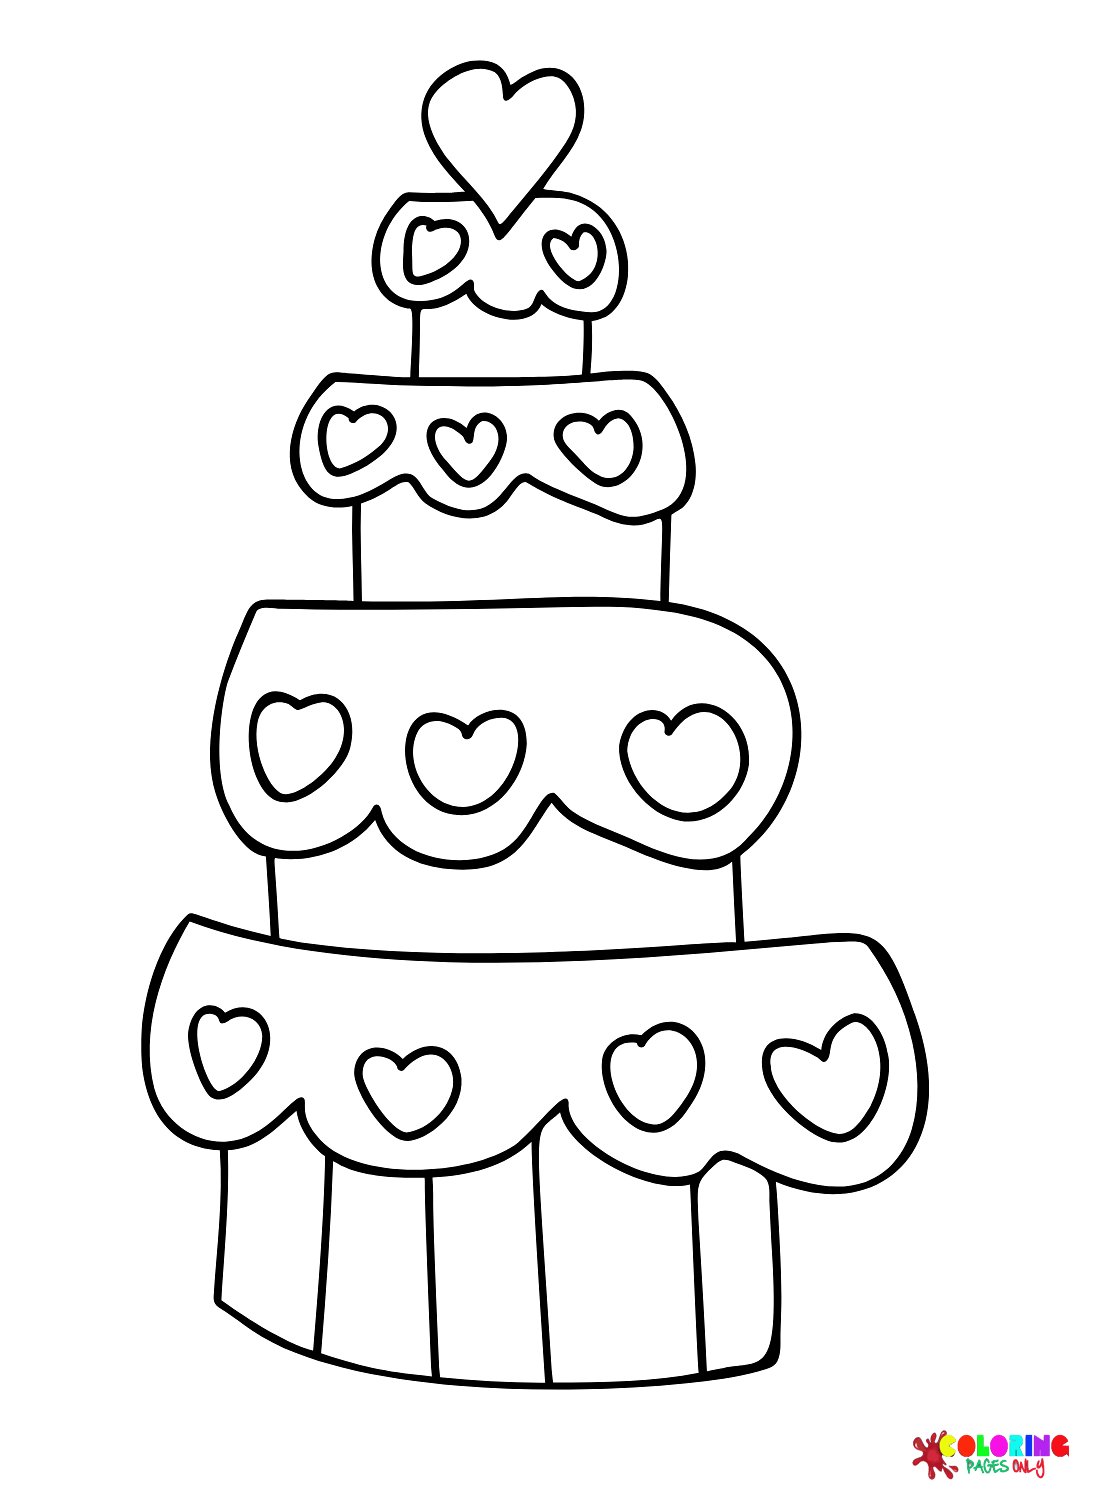 Simple Wedding Cake Coloring Page